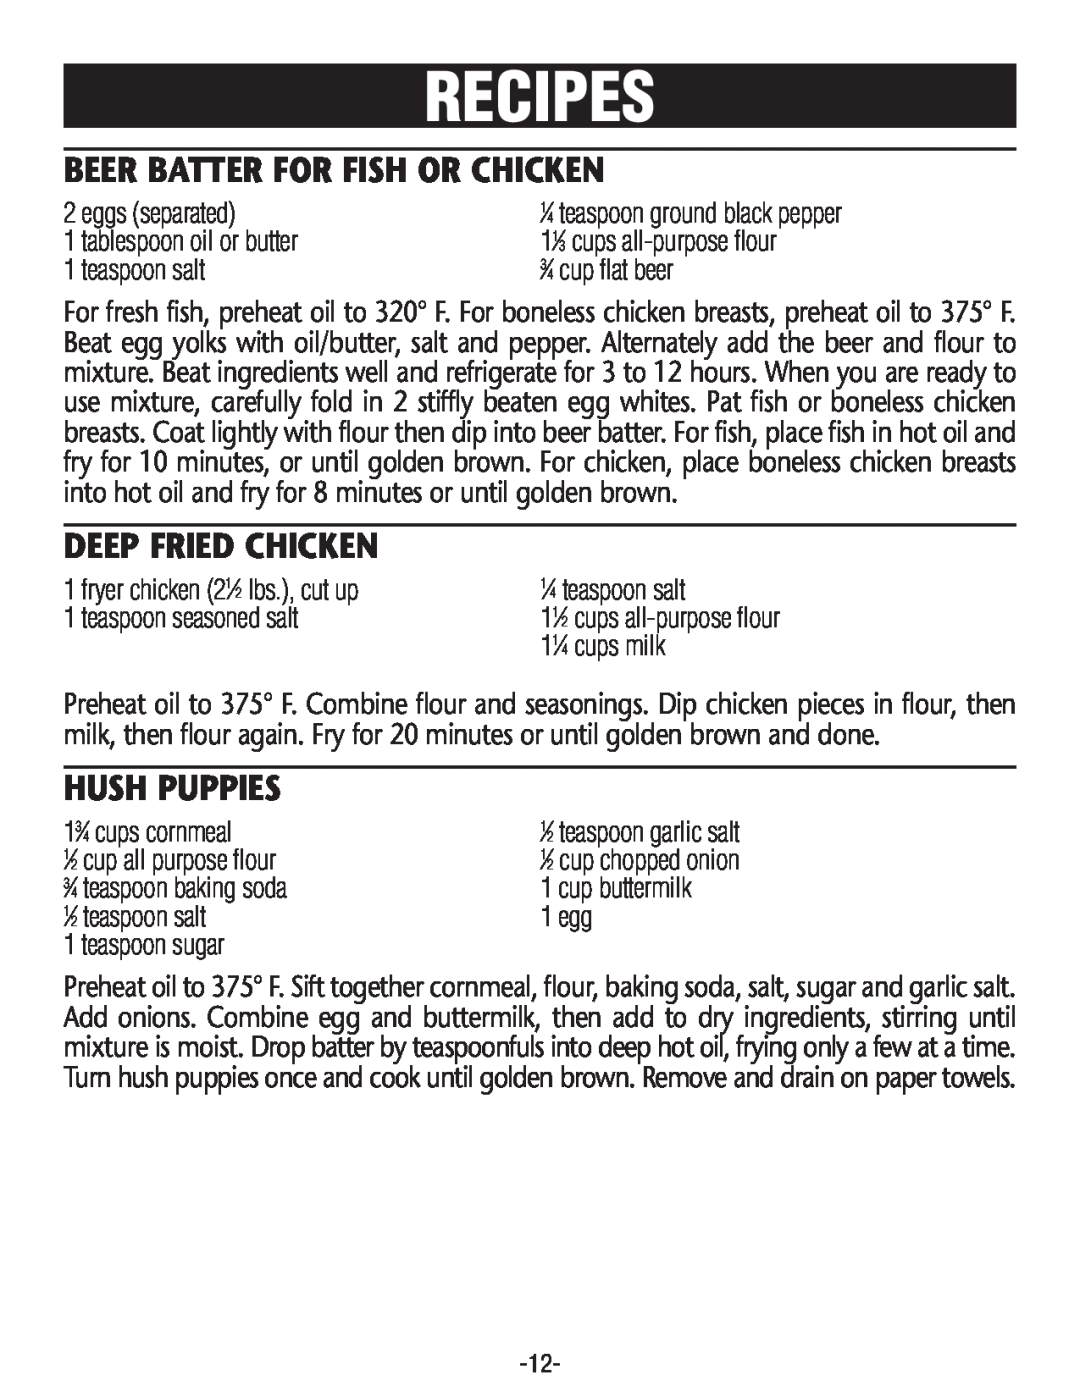 Rival CF154 manual Recipes, Beer Batter For Fish Or Chicken, Deep Fried Chicken, Hush Puppies 